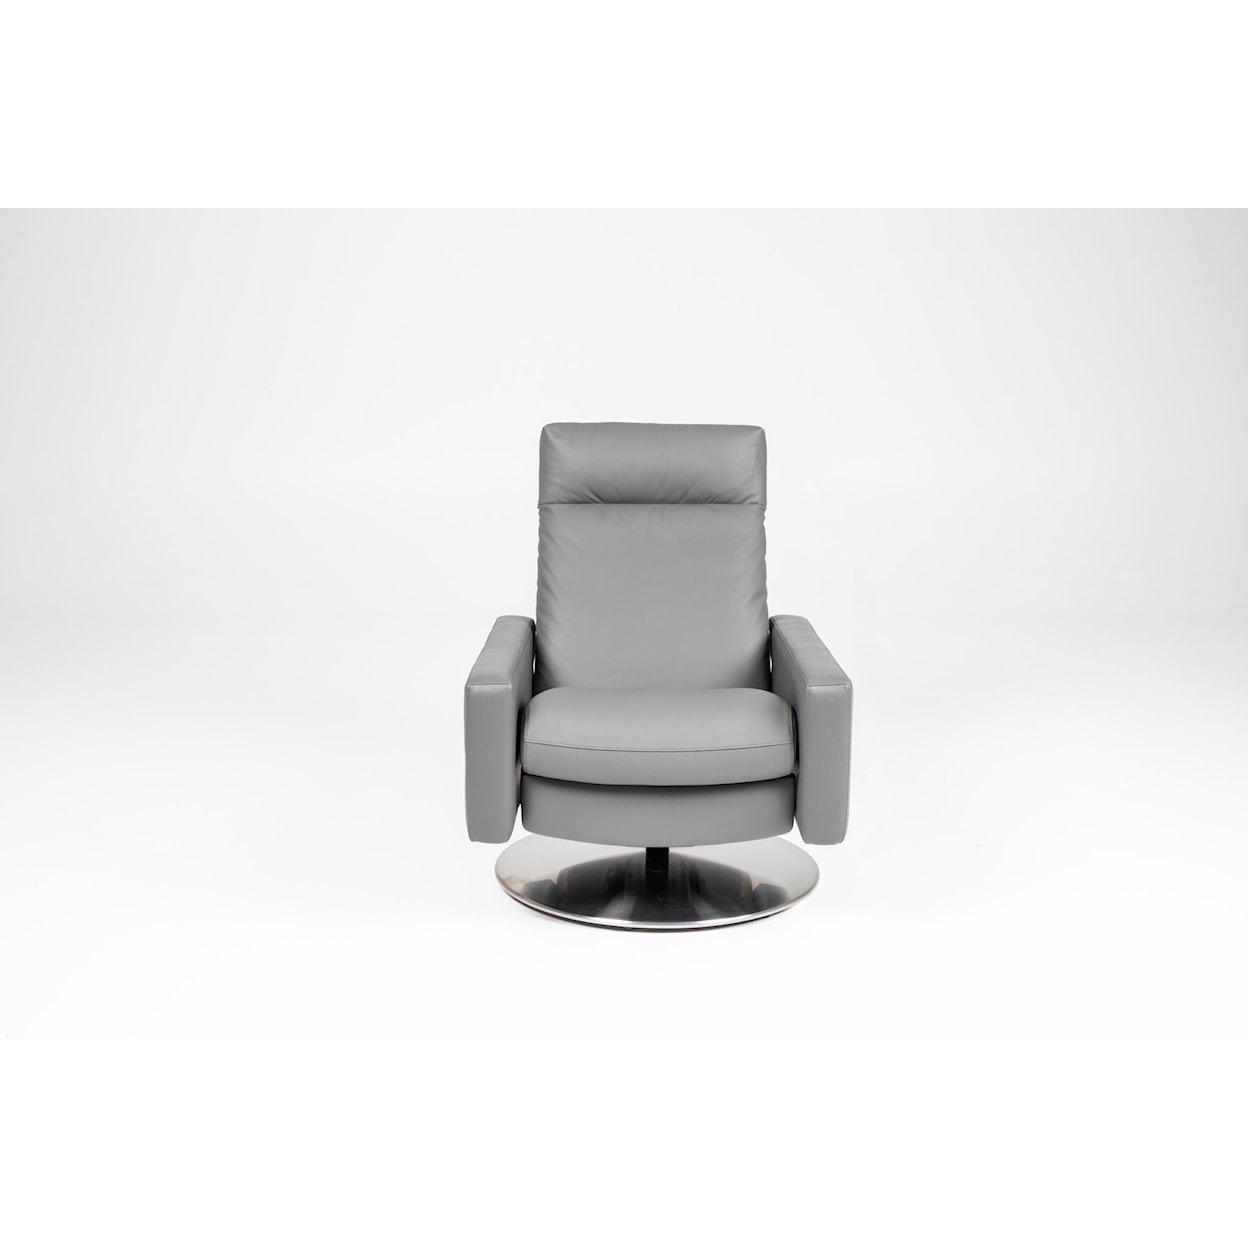 American Leather Cumulus Standard Pushback Chair